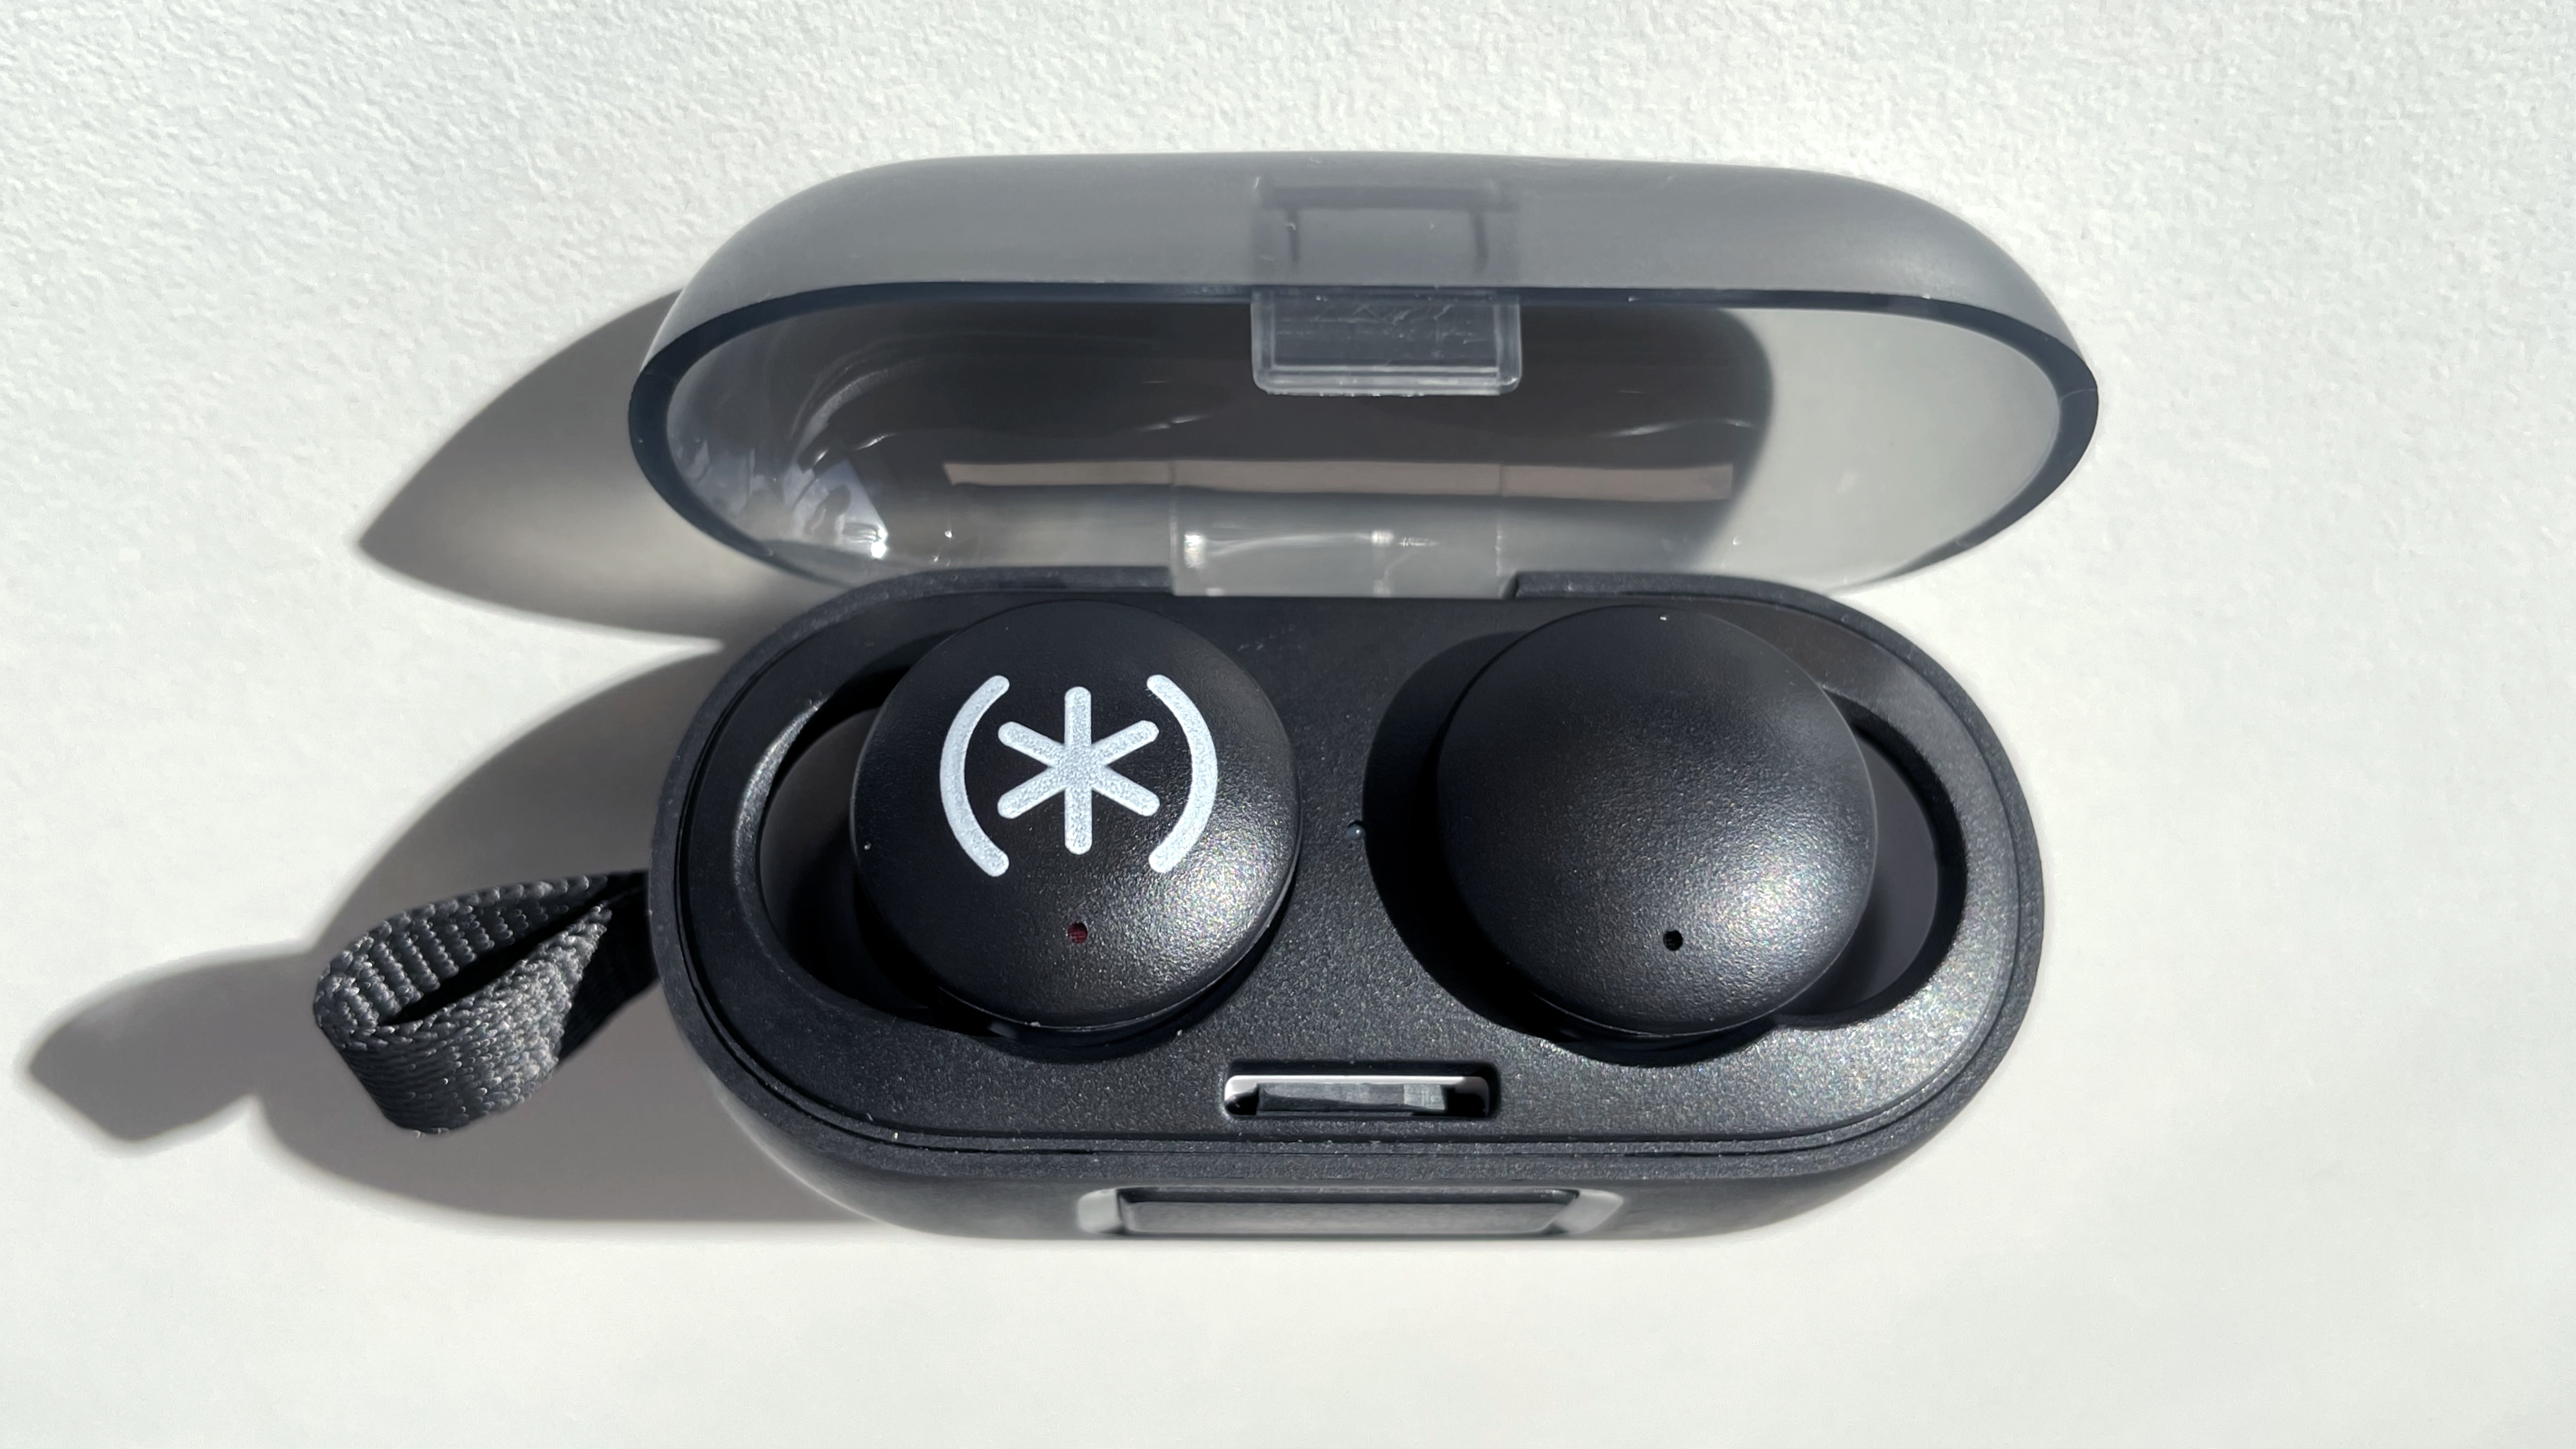 The Speck Gemtones Play earbuds sitting inside their charging case with the lid open, on a white tabletop.